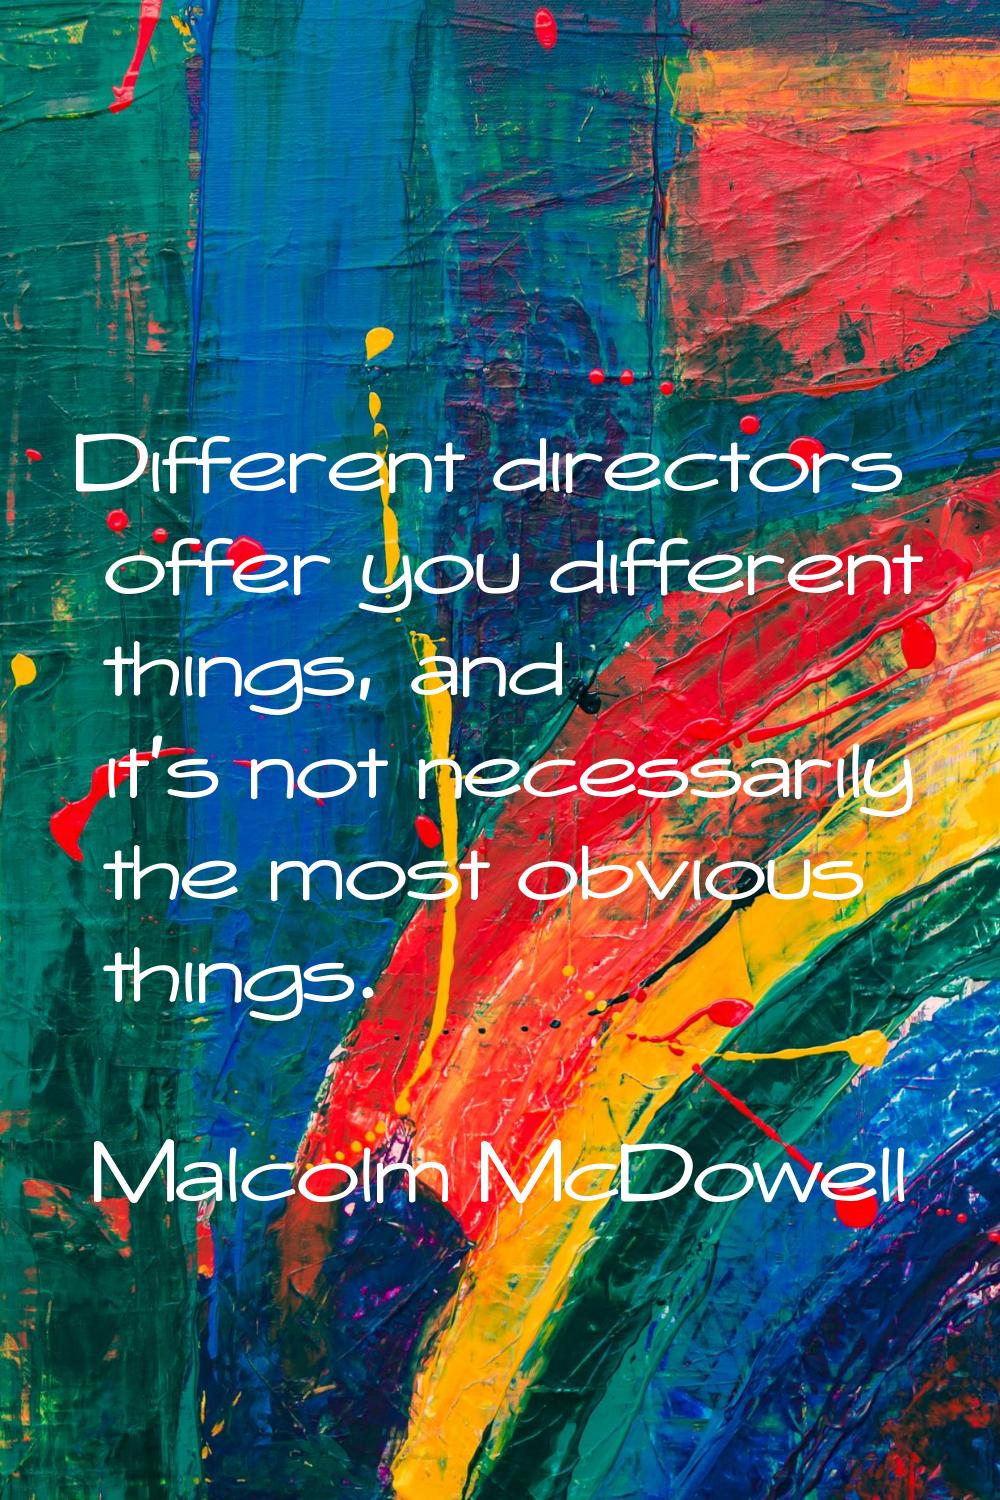 Different directors offer you different things, and it's not necessarily the most obvious things.